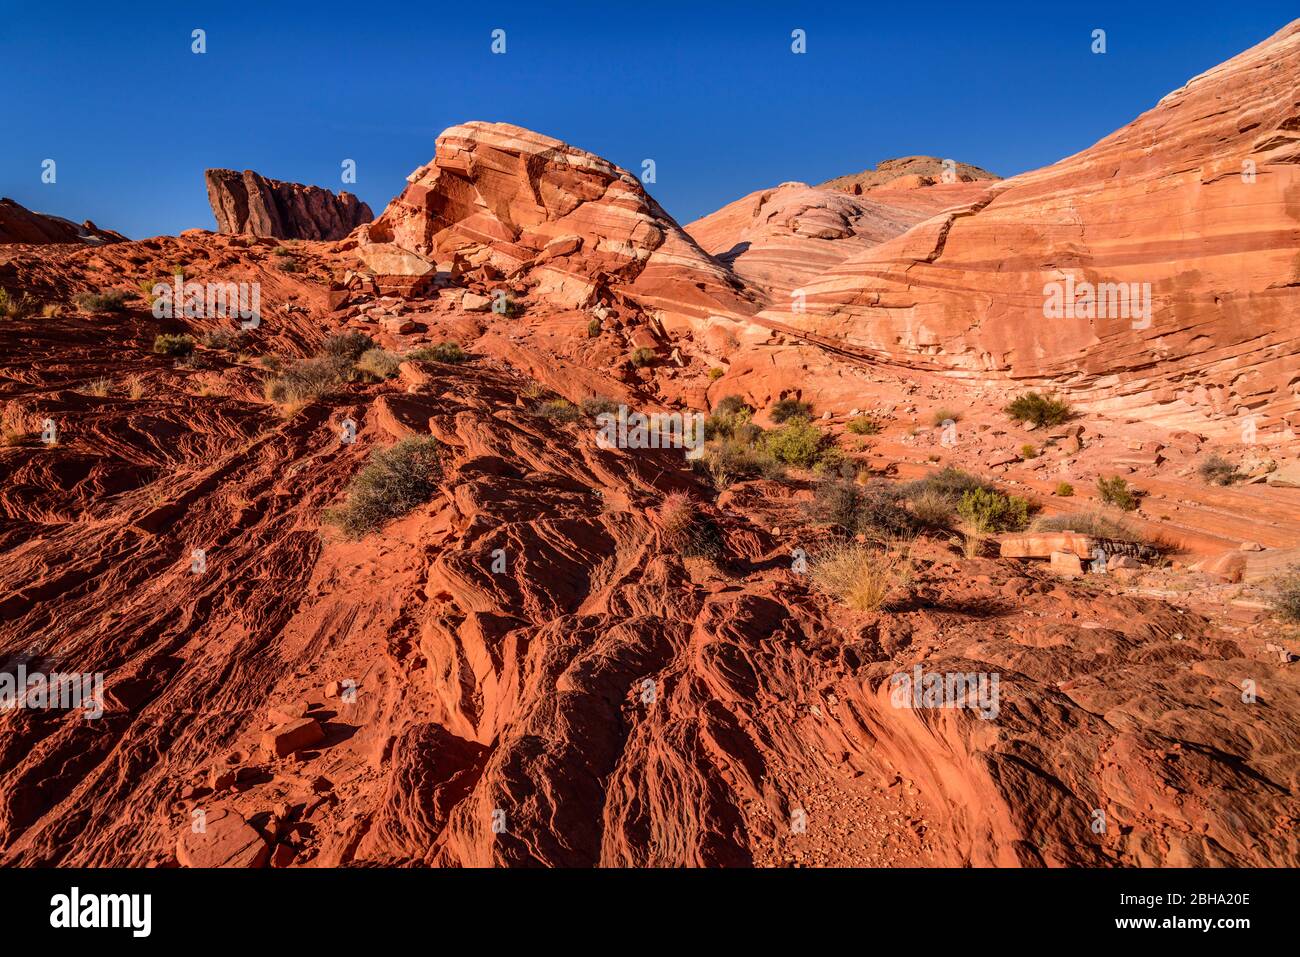 USA, Nevada, Clark County, Overton, Valley of Fire state Park, Fire Wave mit Gibilterra Rock Foto Stock